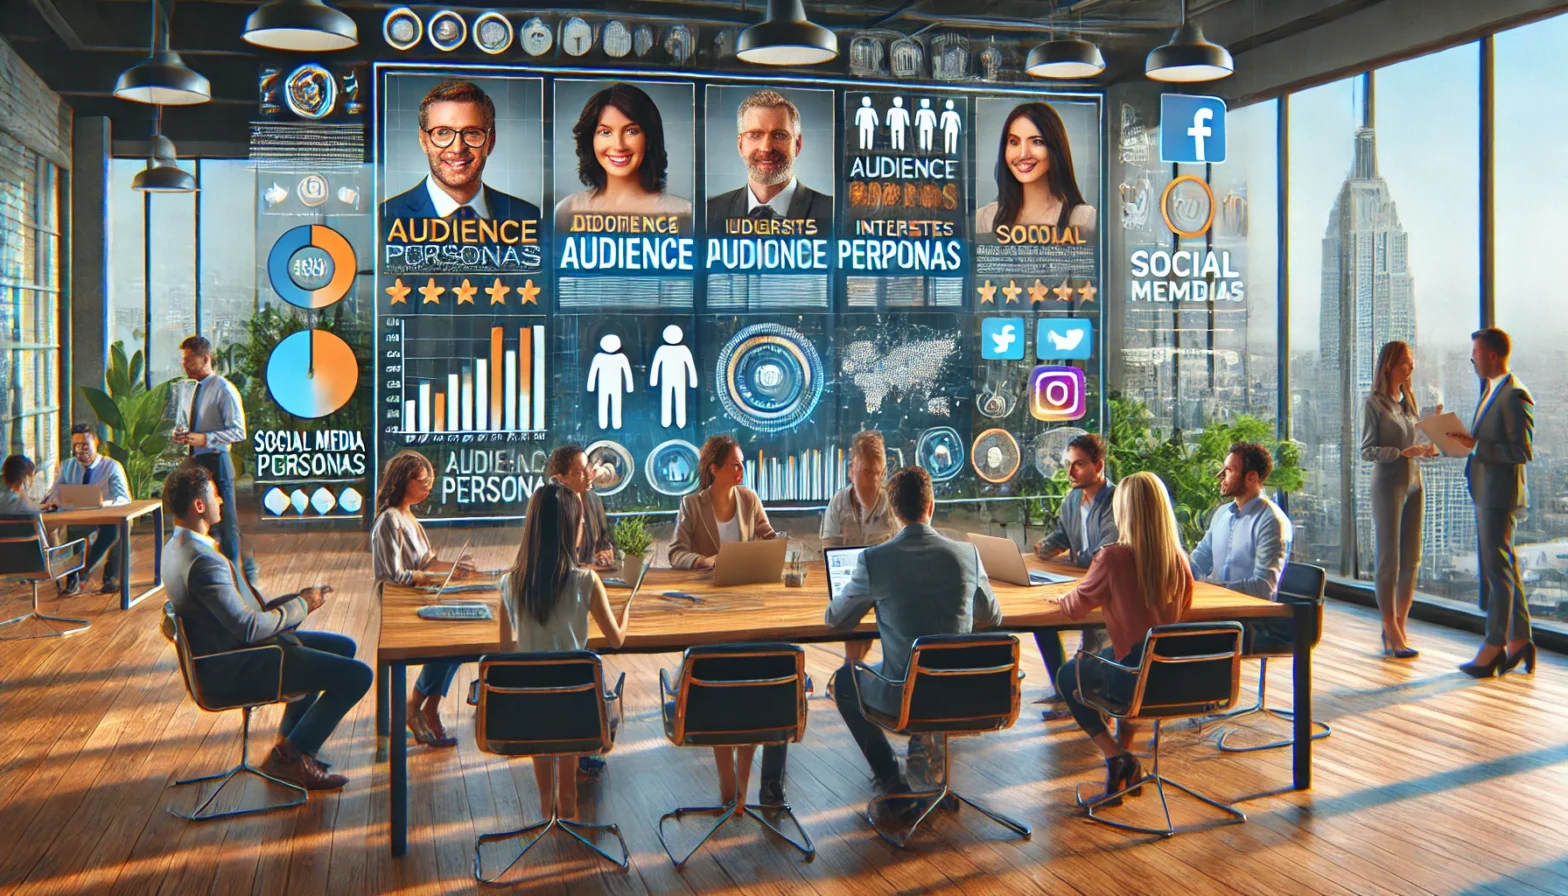 A team of diverse professionals in a modern office environment, collaborating around a large screen displaying detailed audience personas with demographic information, interests, and social media usage patterns. Charts, graphs, and social media icons are visible, enhancing their discussion on optimizing social media strategy.